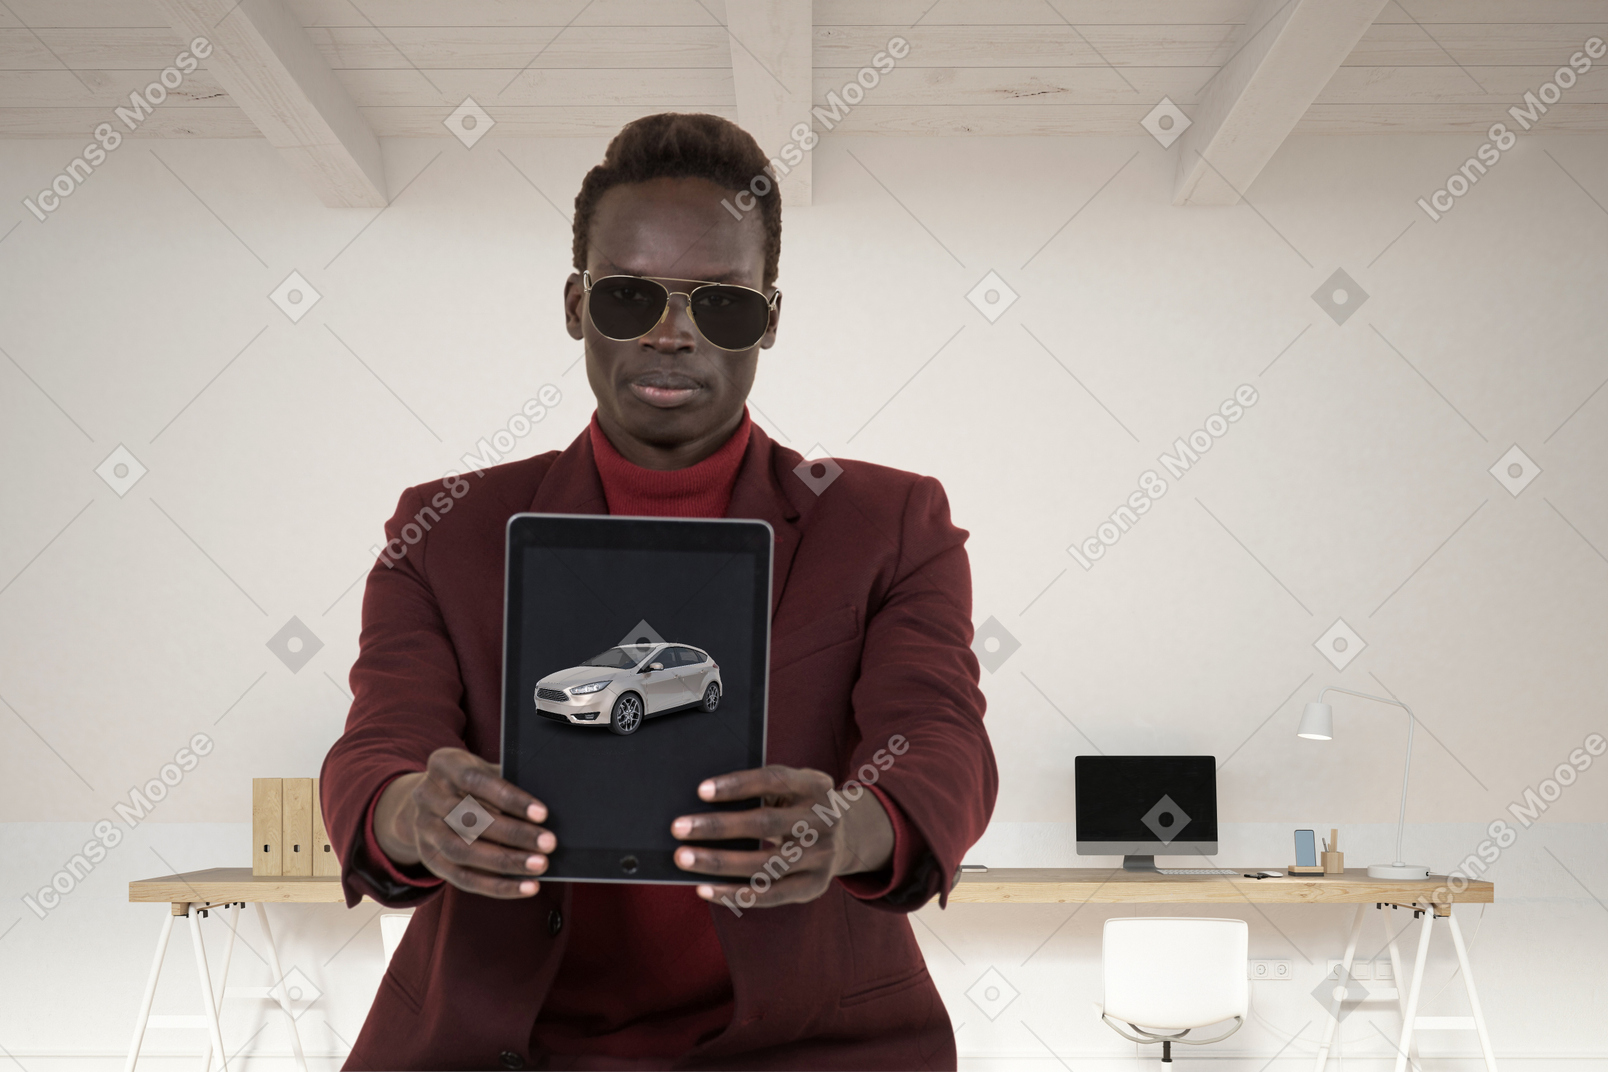 A man holding up a tablet with a car on it